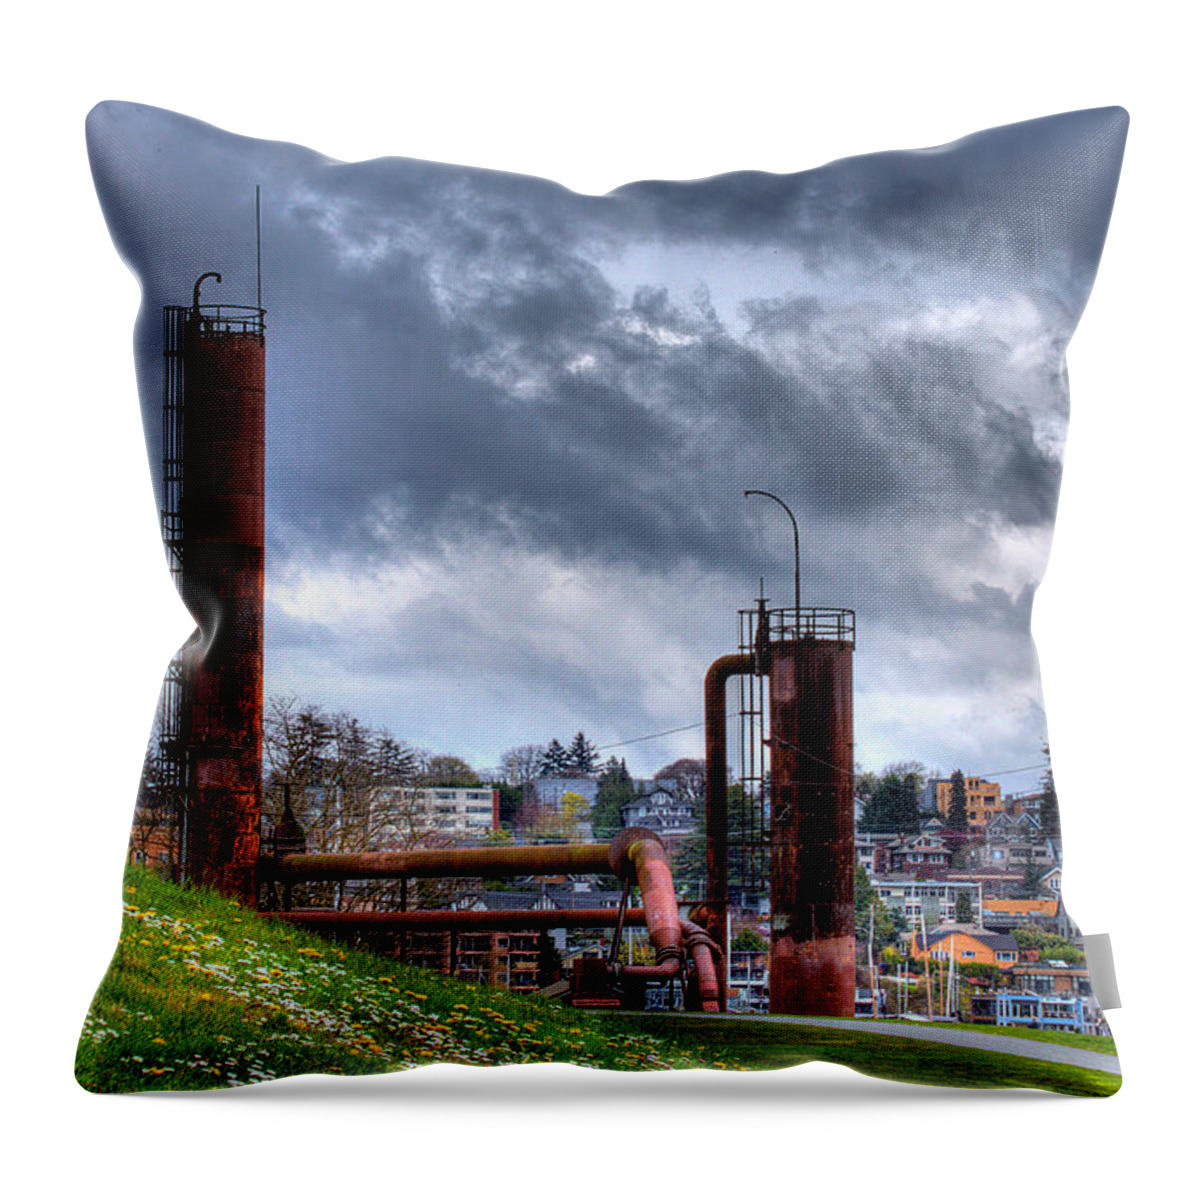 Gasworks Park Throw Pillow featuring the photograph Gasworks Park - Seattle Washington by David Patterson